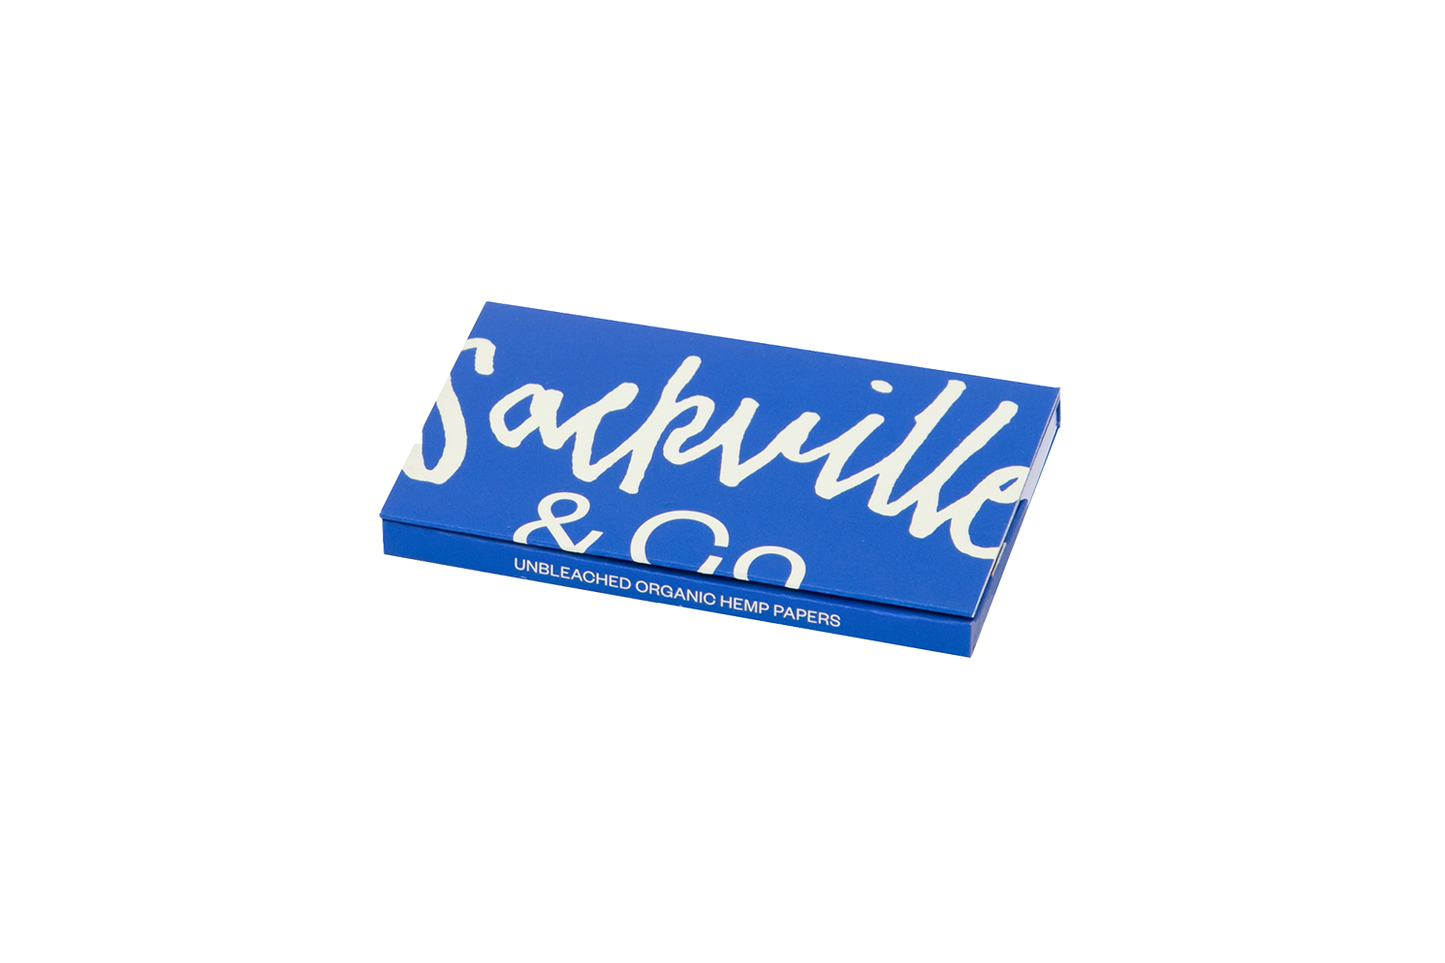 BLUE ROLLING PAPERS - Sackville & Co.